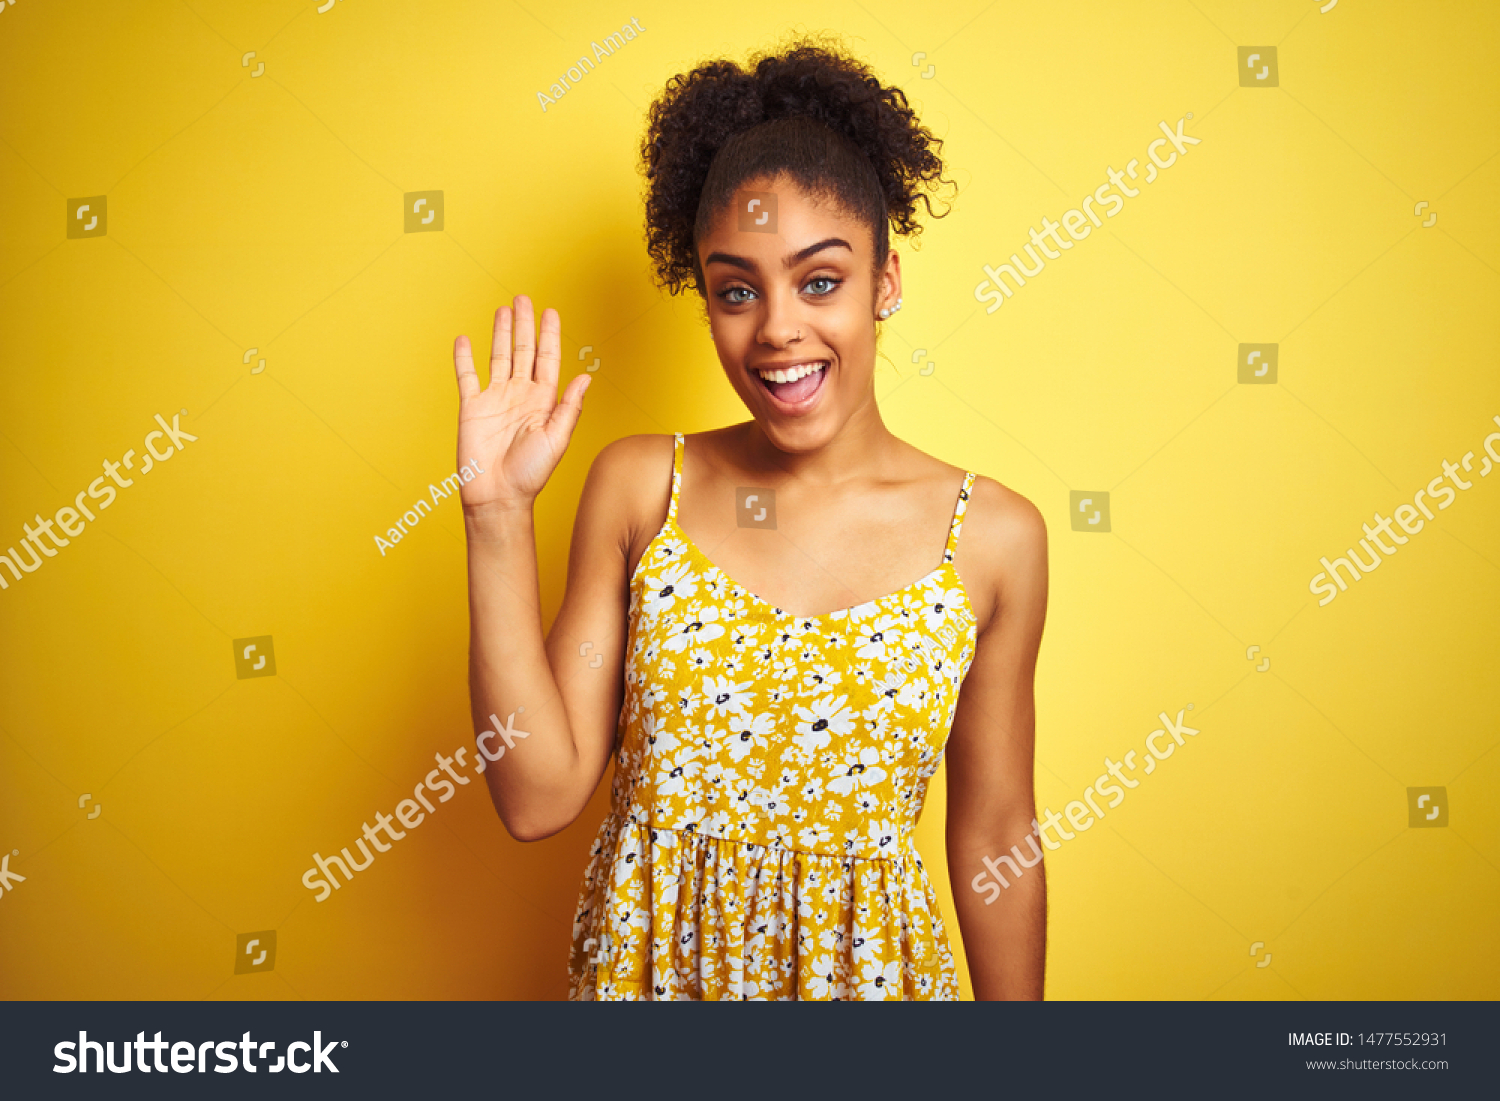 African american woman wearing casual floral dress standing over isolated yellow background Waiving saying hello happy and smiling, friendly welcome gesture #1477552931